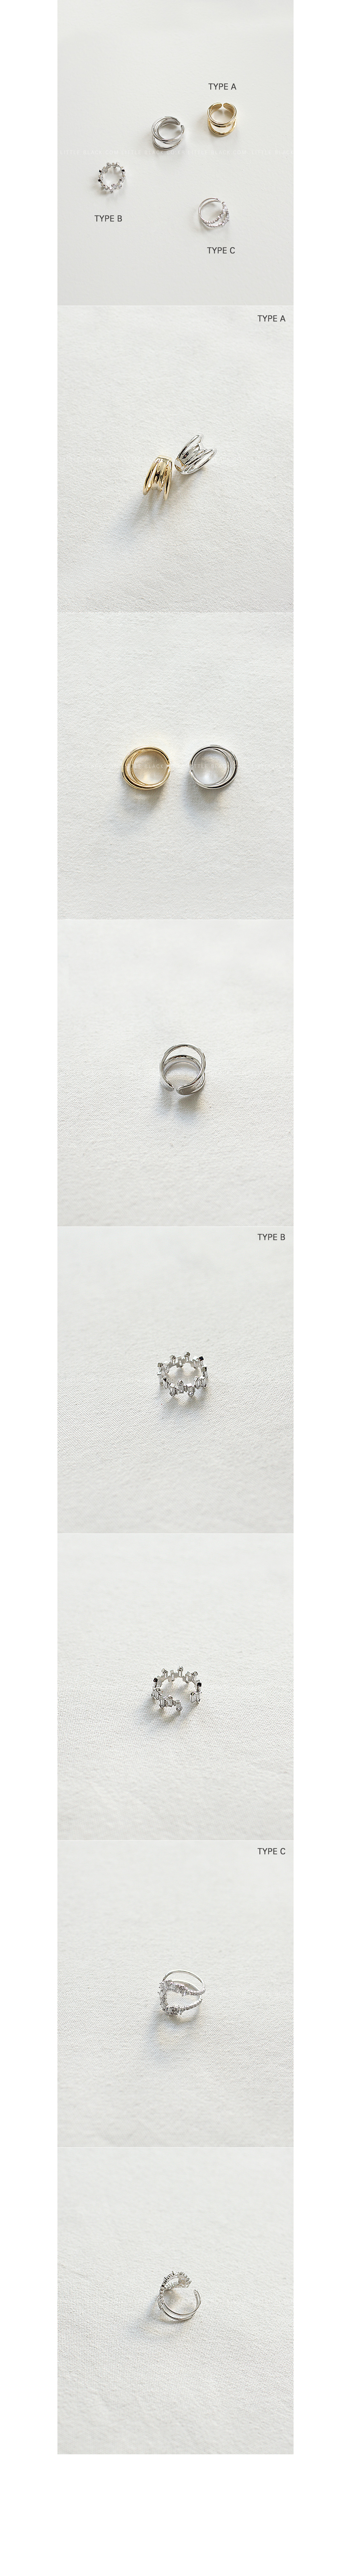 Silver And Gold Tone Rings|